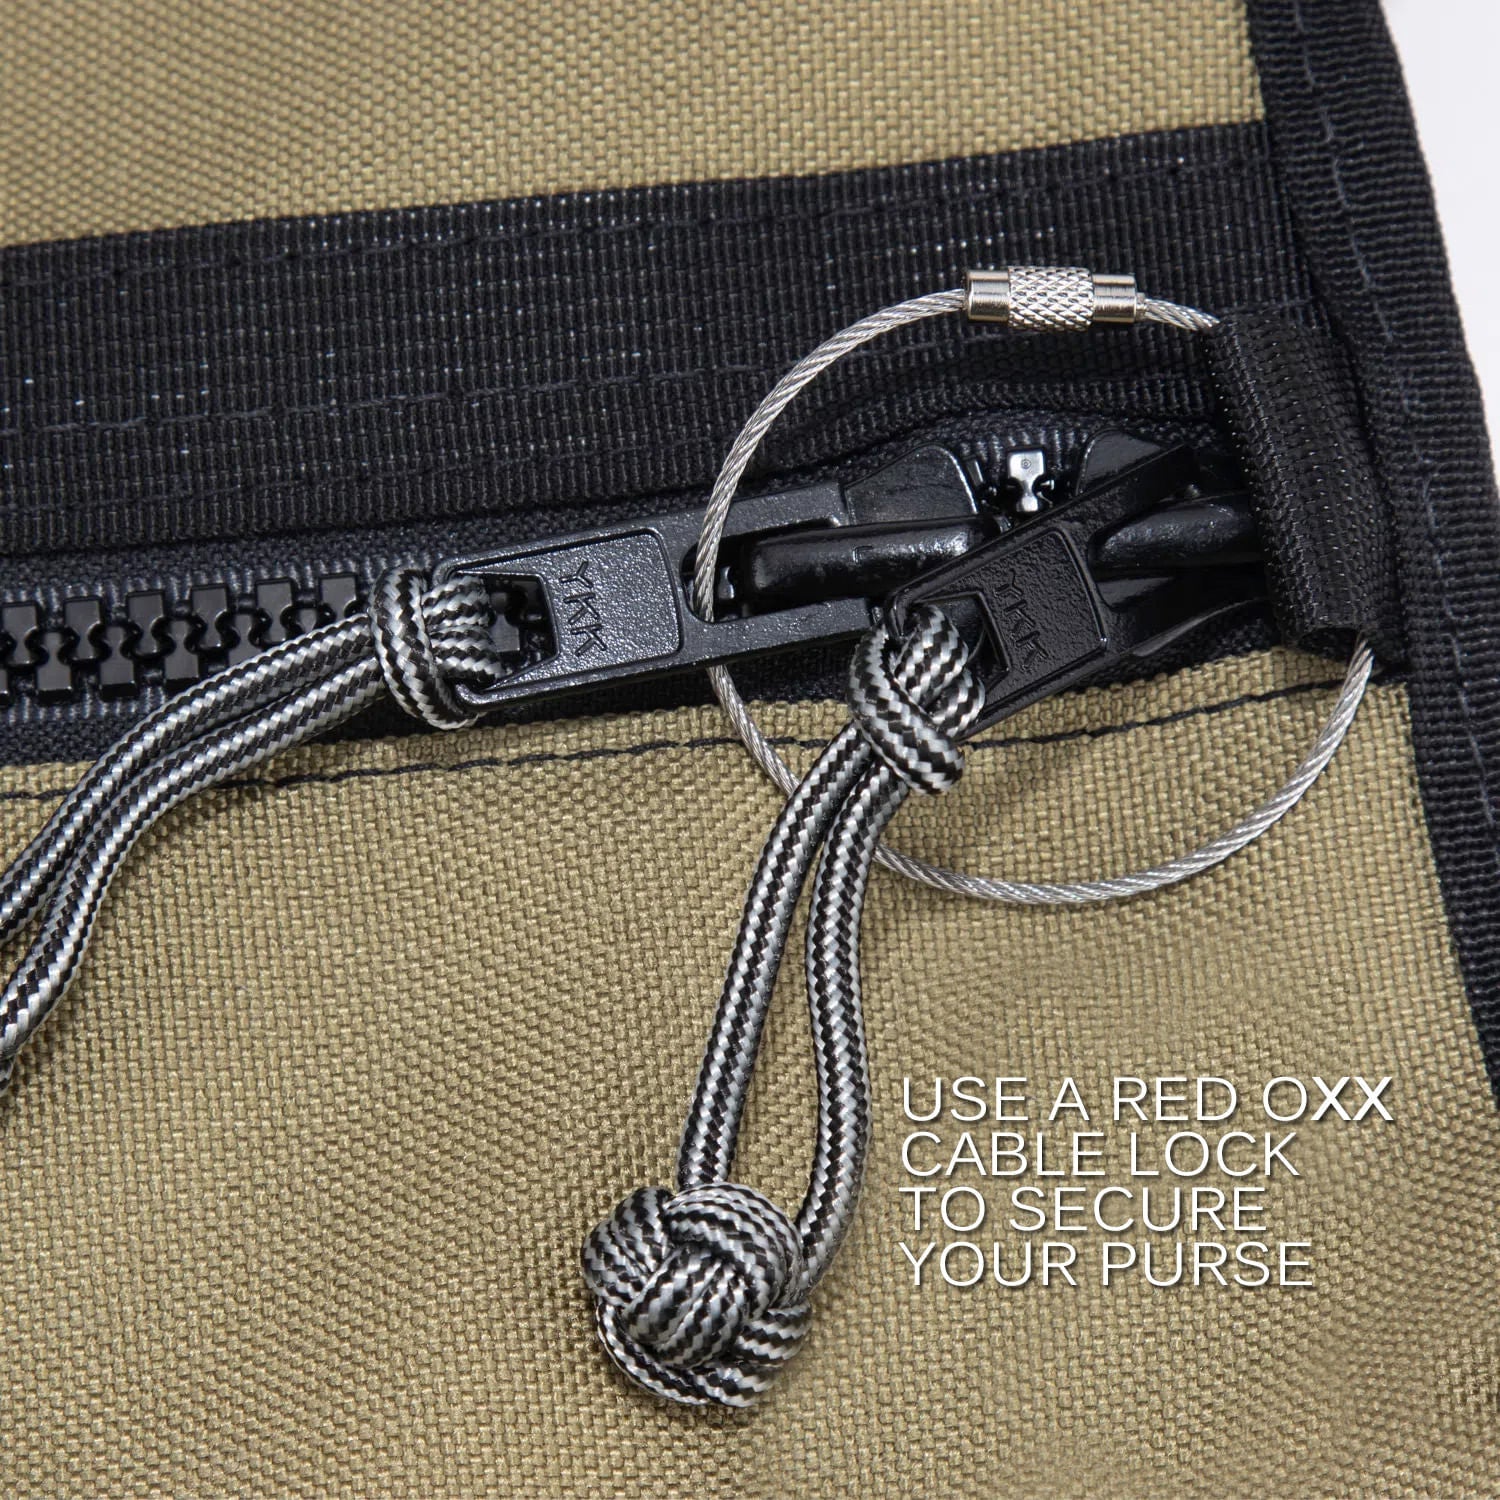 Use a Red Oxx cable lock to secure your purse. 